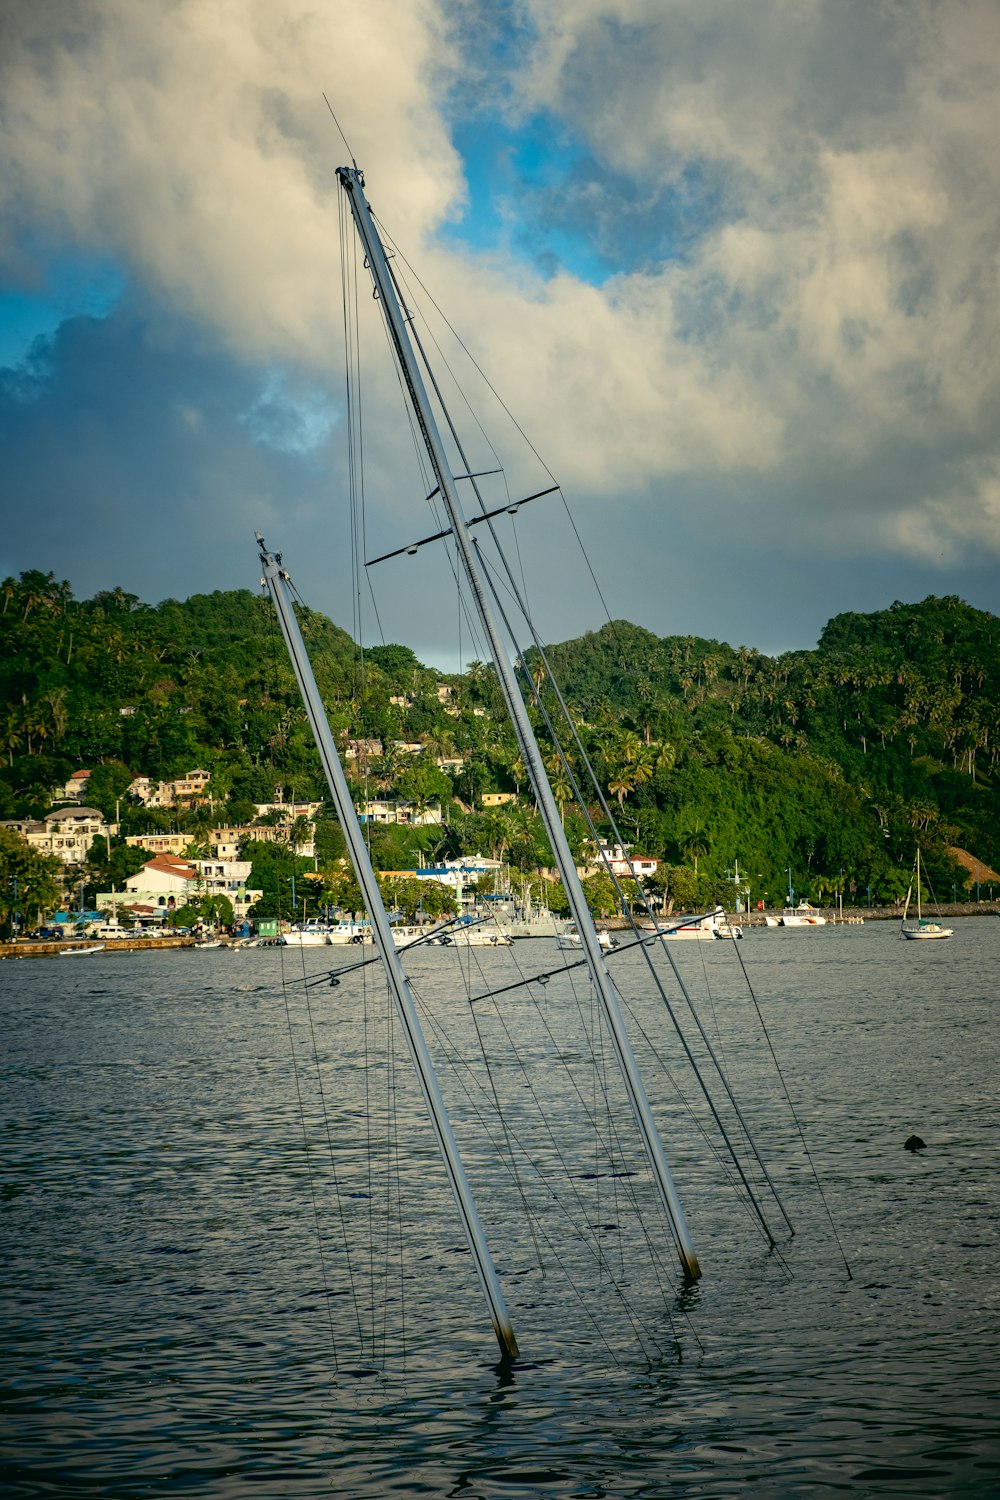 a sailboat in a body of water with a mountain in the background